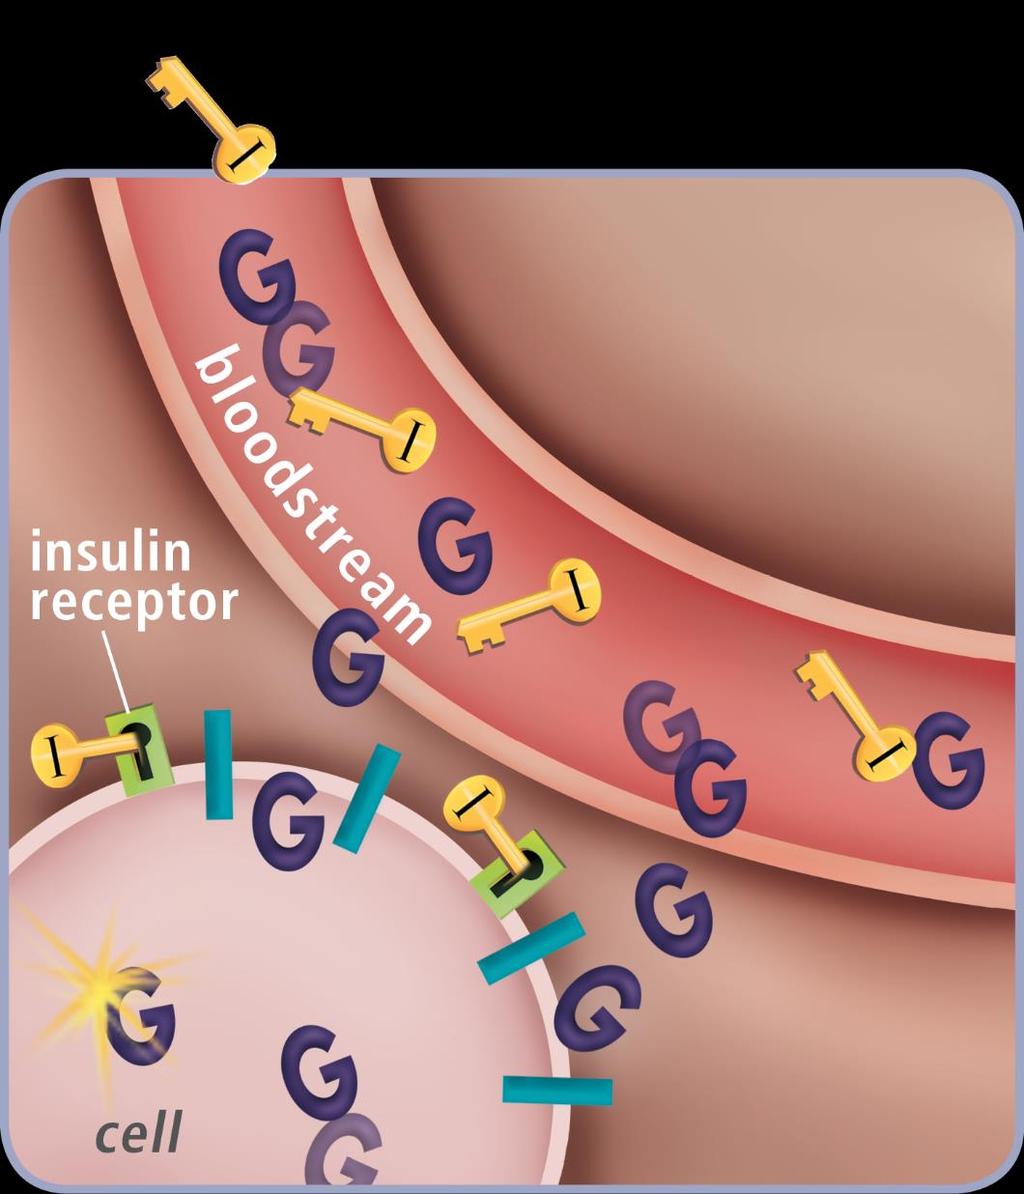 How things normally work Insulin acts as a key to unlock the cell so glucose can